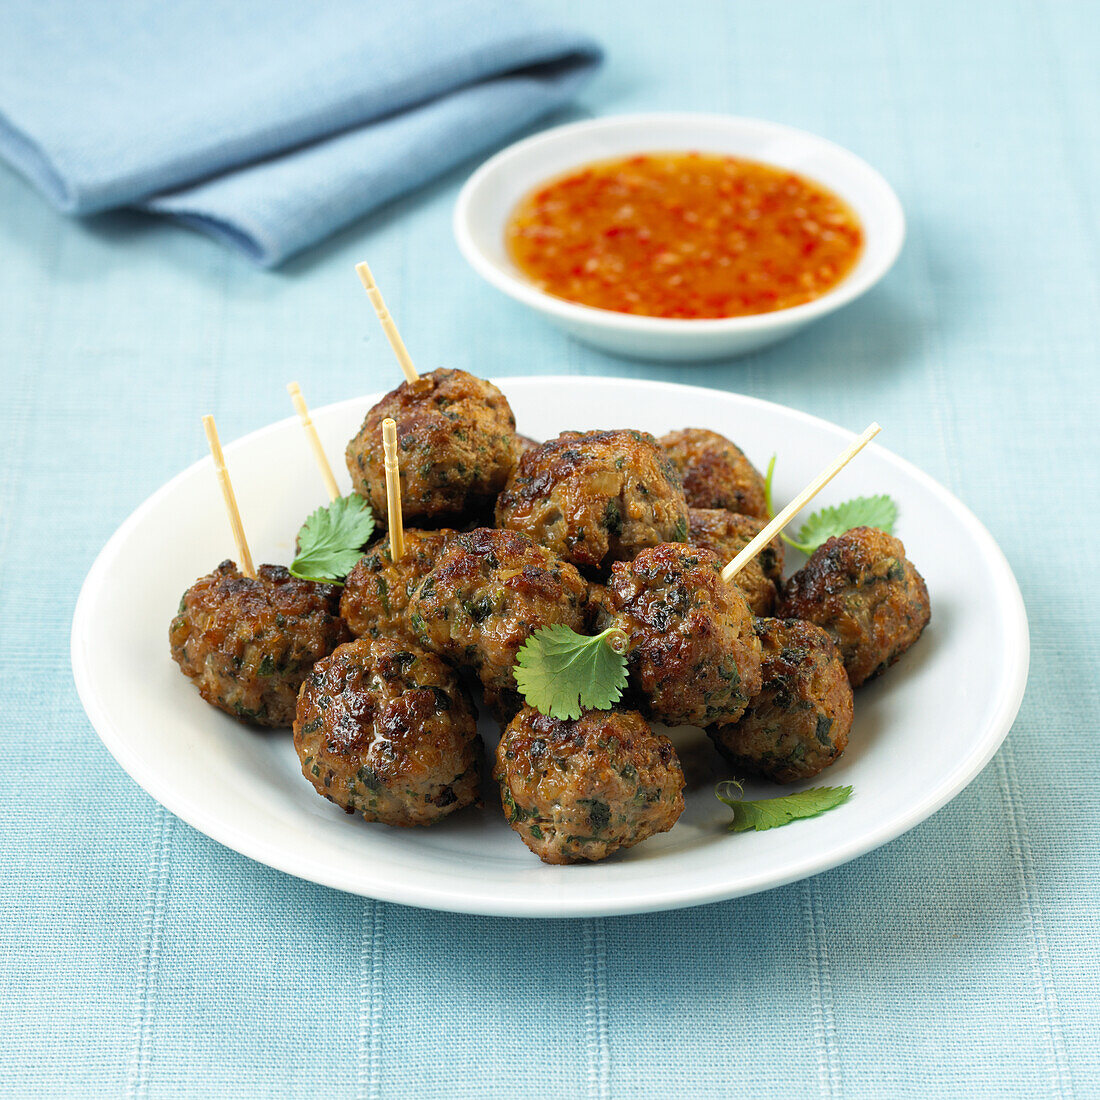 Plate of pork meatballs served with sweet chilli sauce